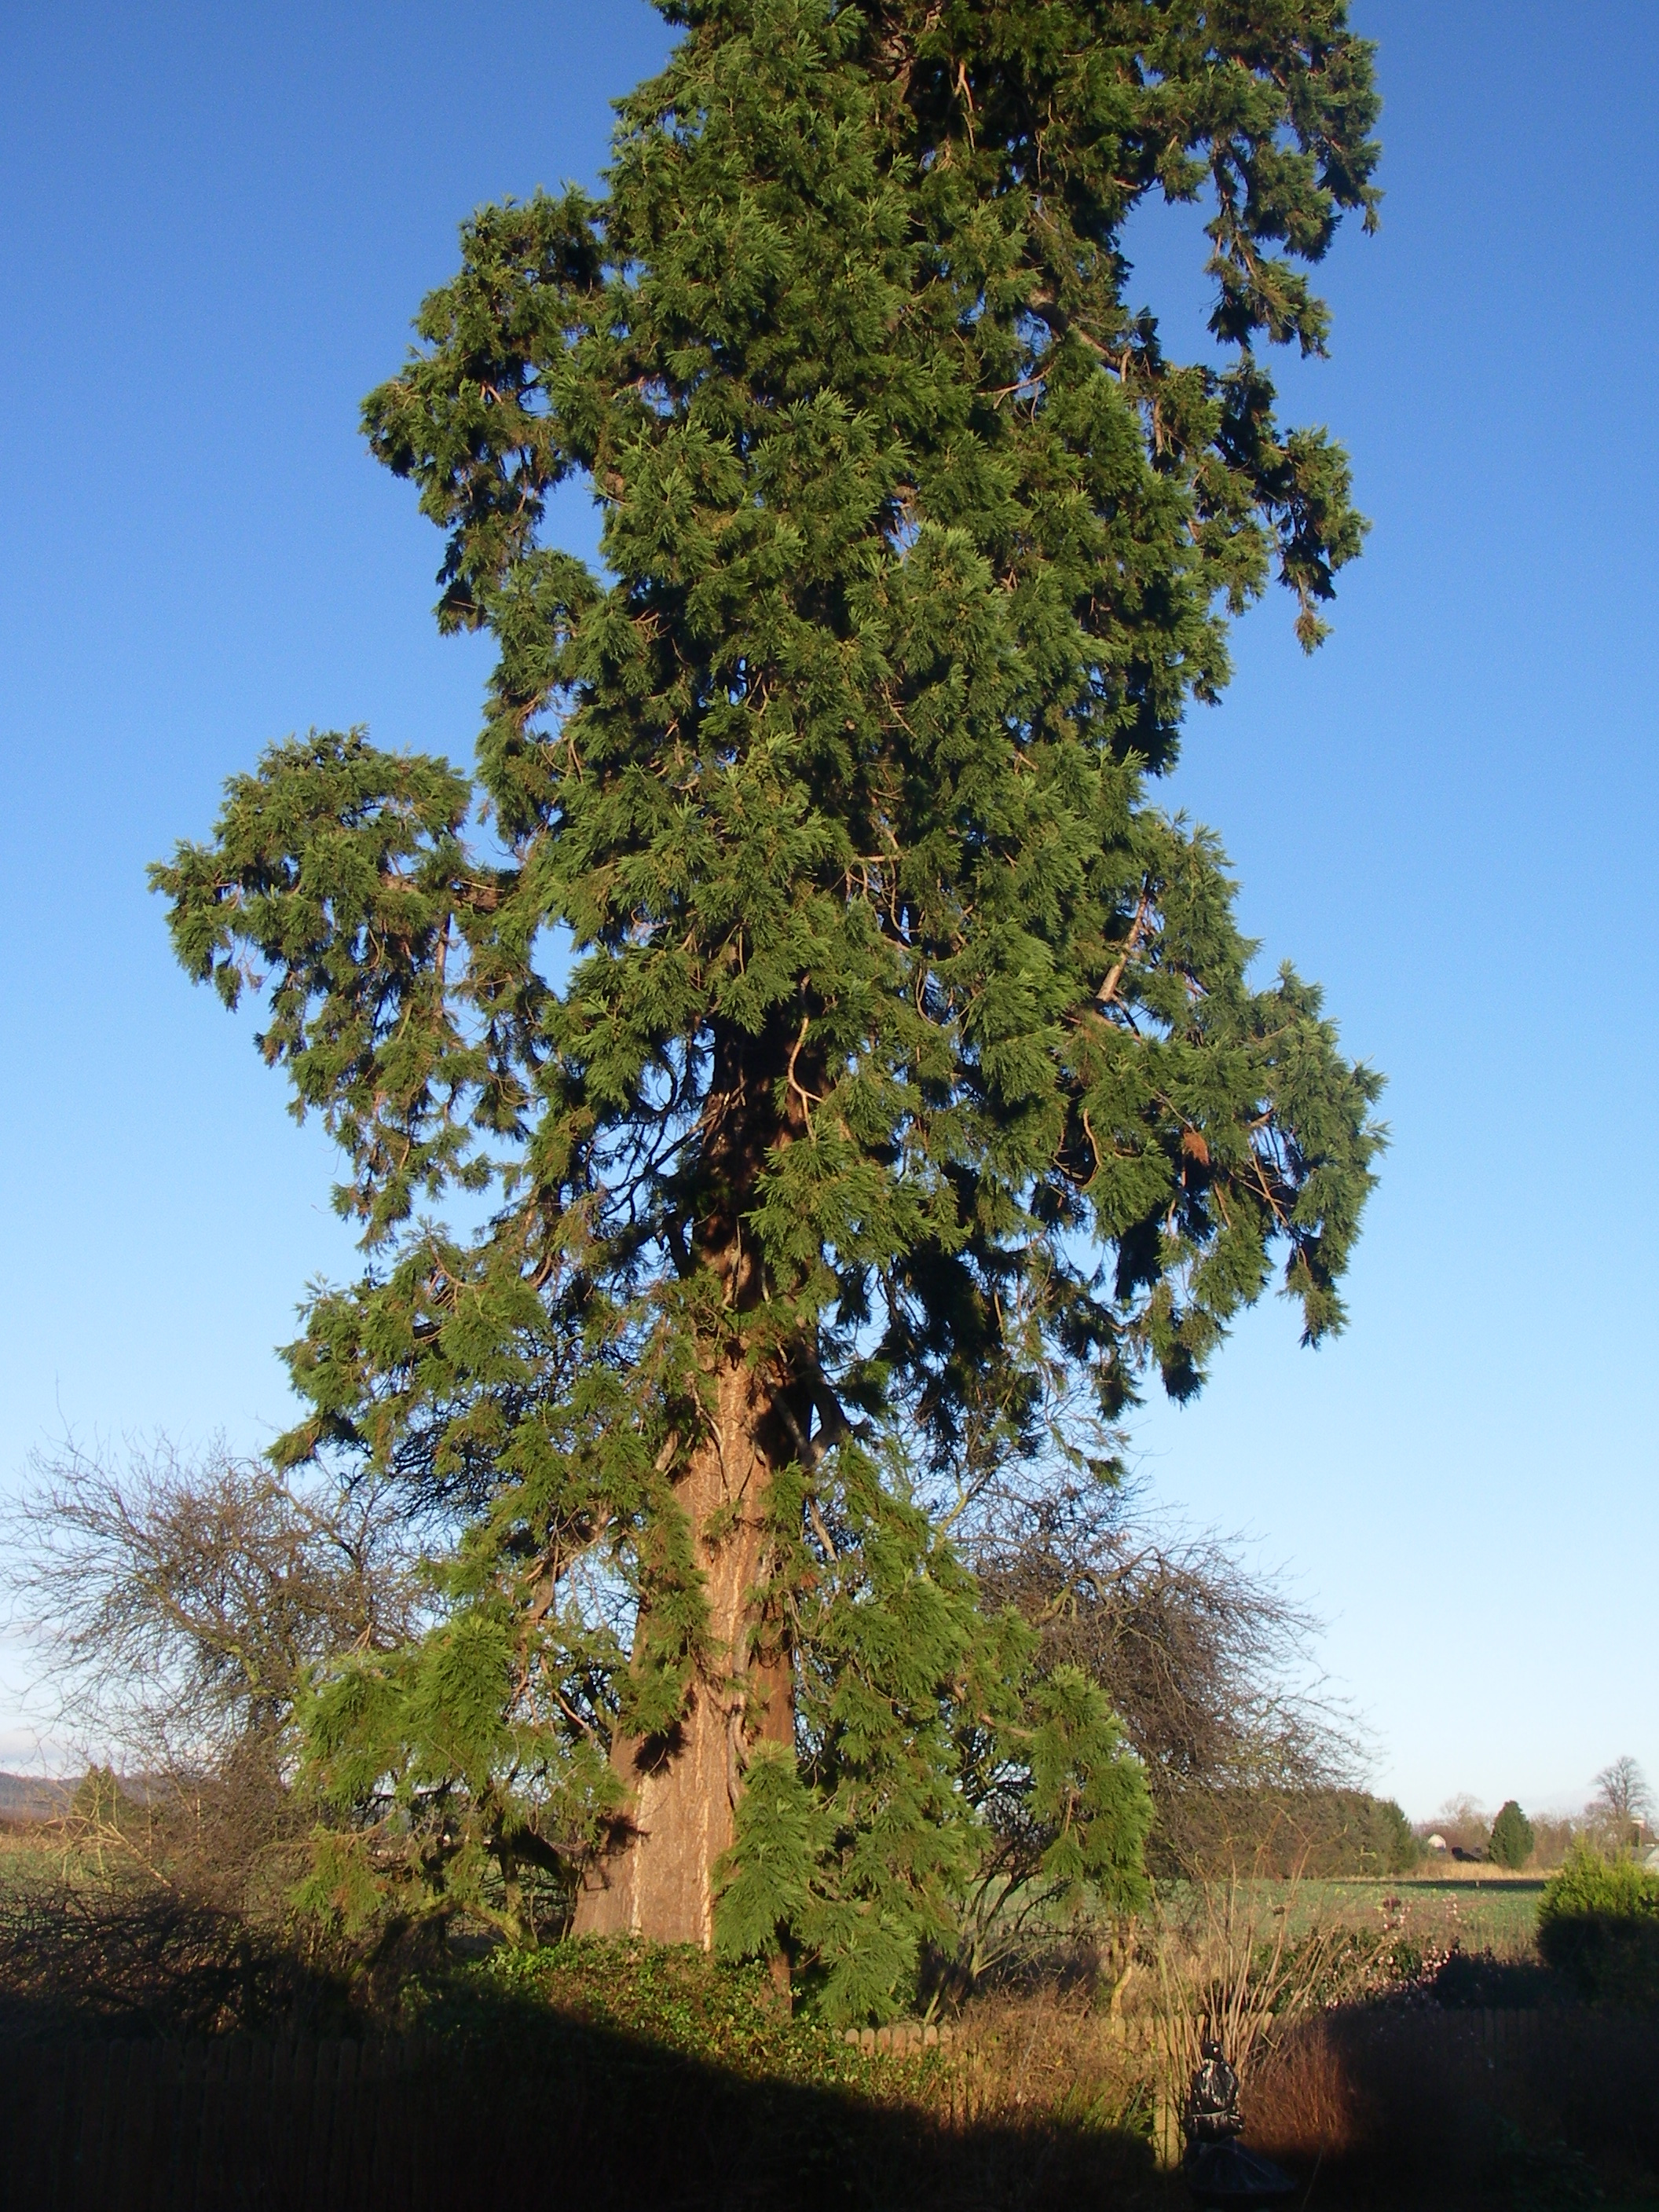 An original giant redwood planted in Scotland